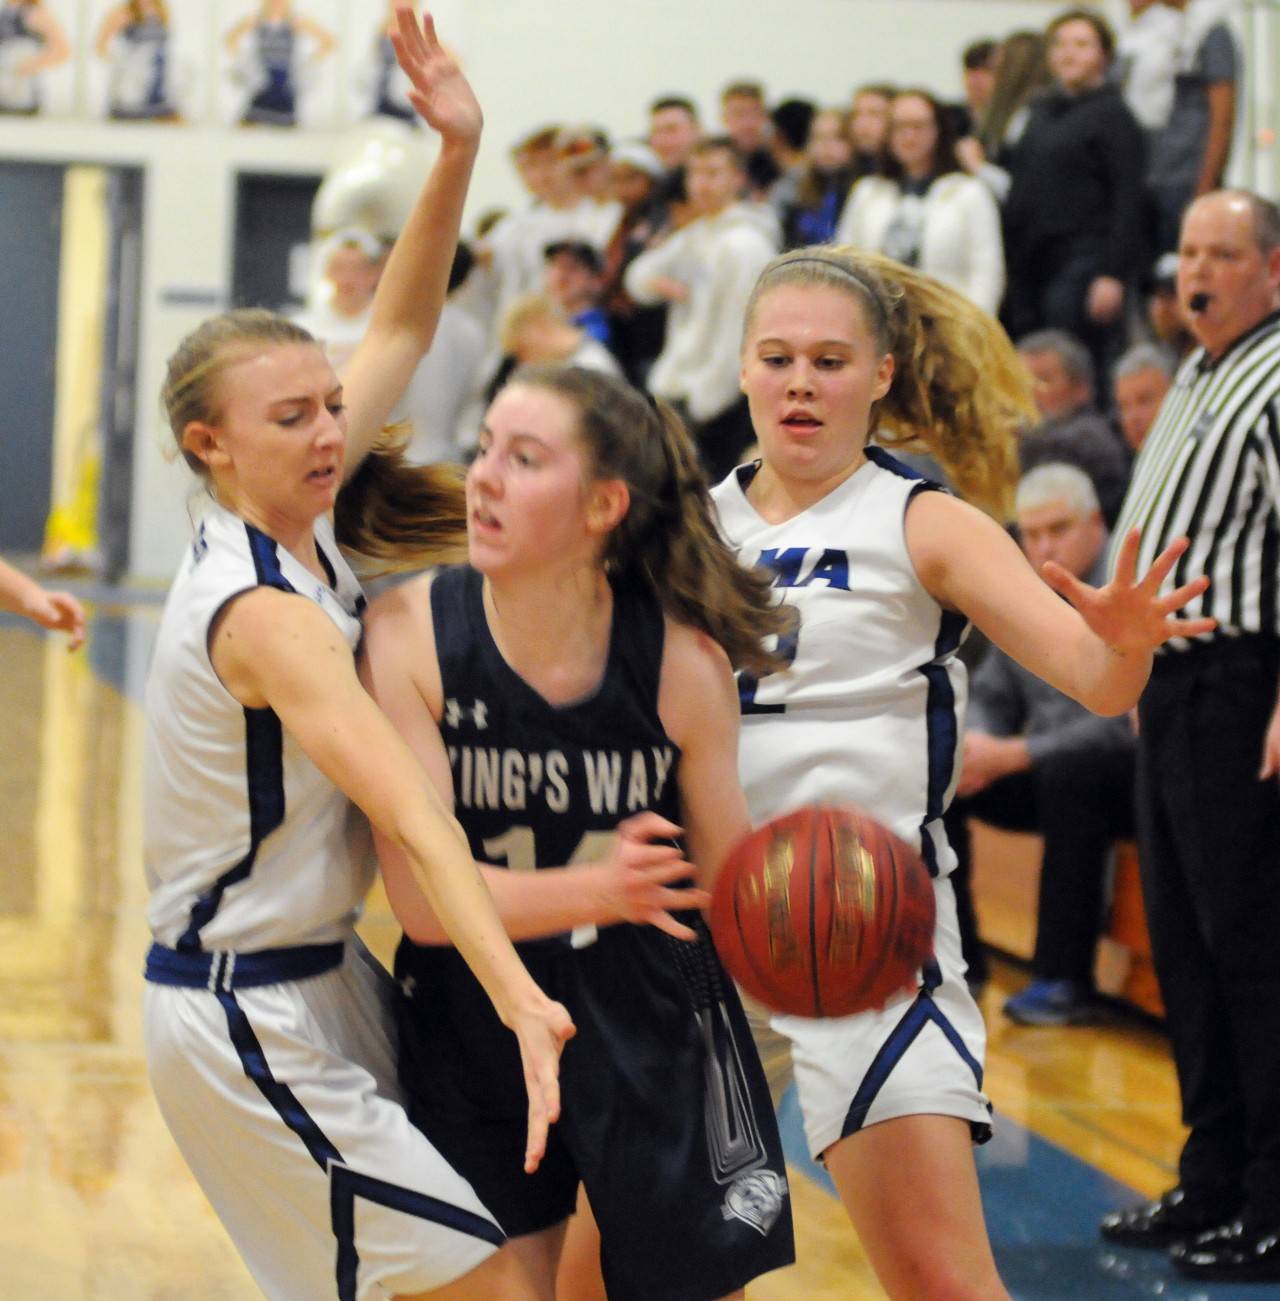 Elma’s Jillian Bieker, left, and Quin Mikel, right, pressure King’s Way Christian’s Laurel Quinn during Elma’s 45-26 1A District 4 Tournament victory on Saturday in Elma. The 26 points scored by KWC was a season-low for the Knights. (Ryan Sparks | Grays Harbor News Group)